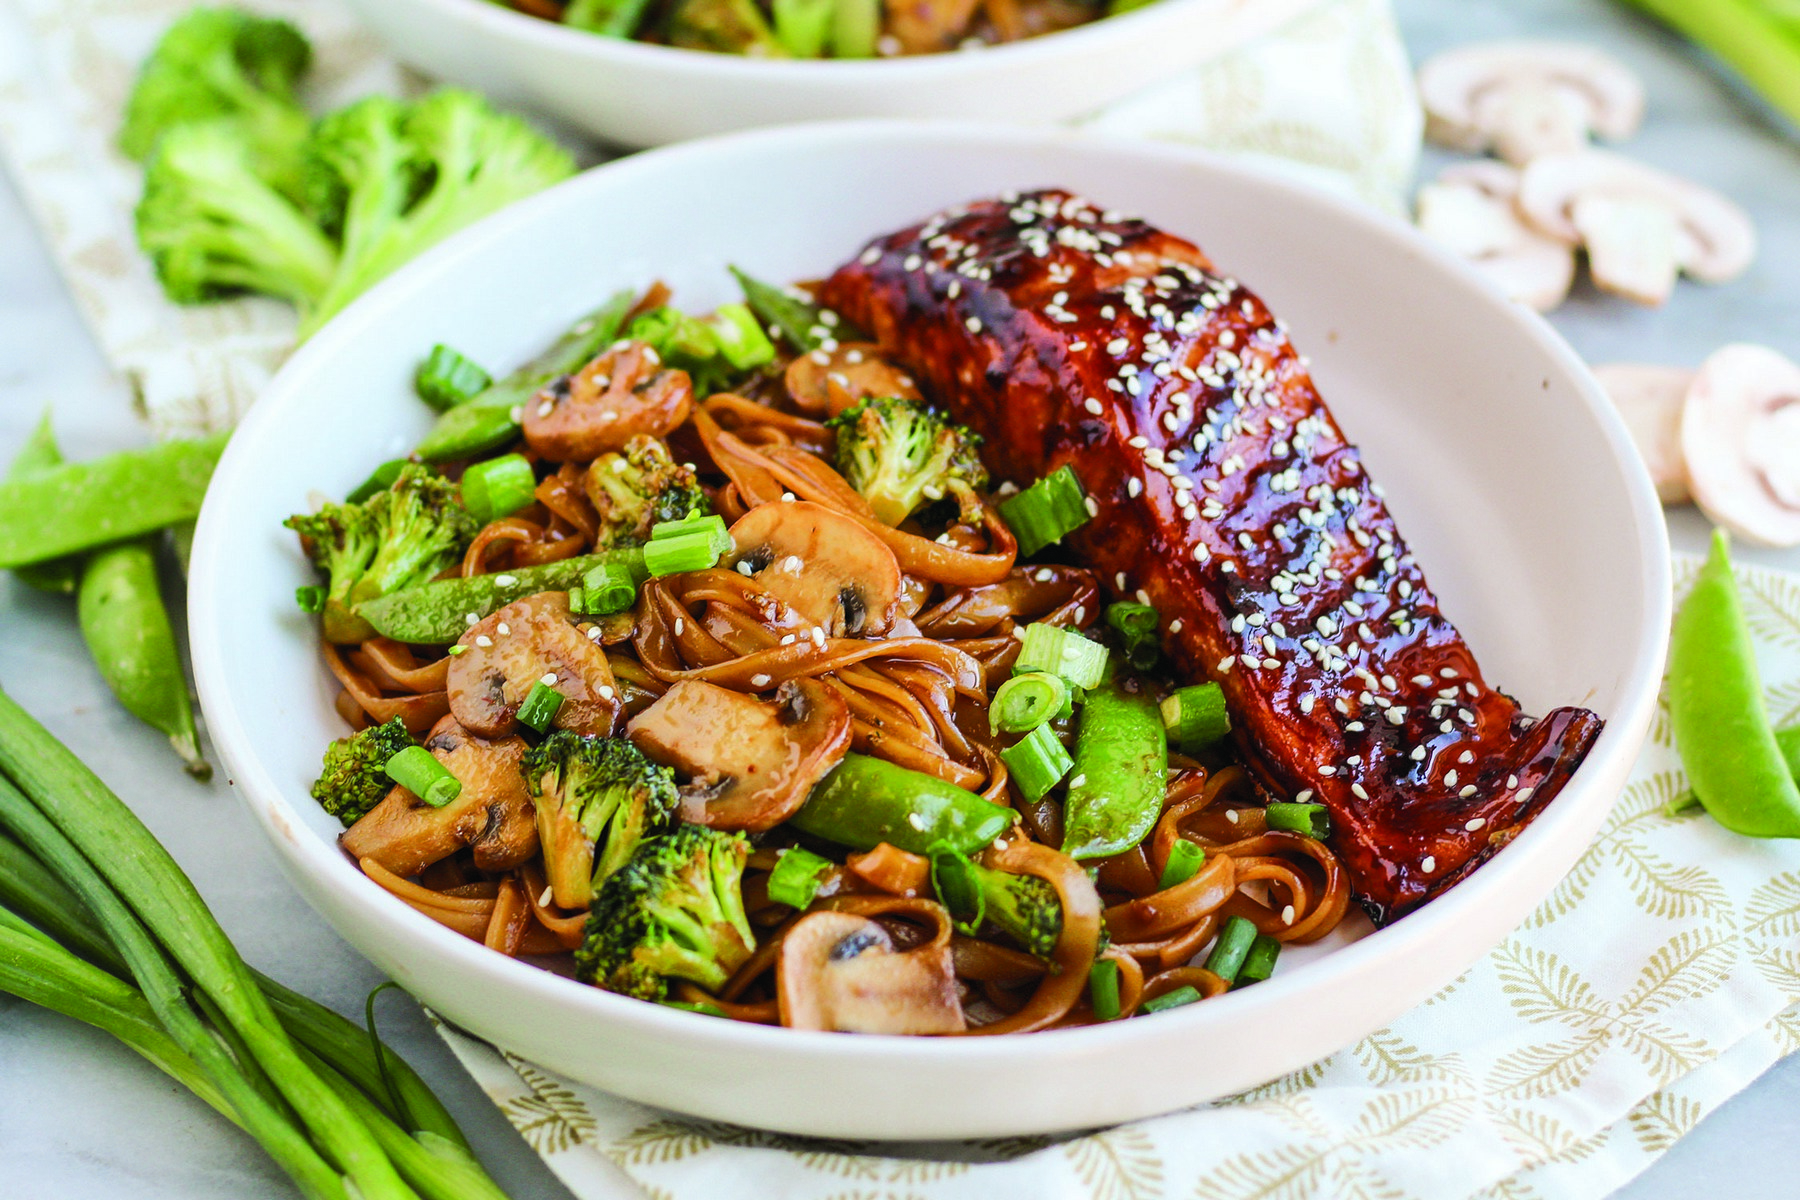 Asian Barbecue Sesame Salmon with Noodles and Veggies